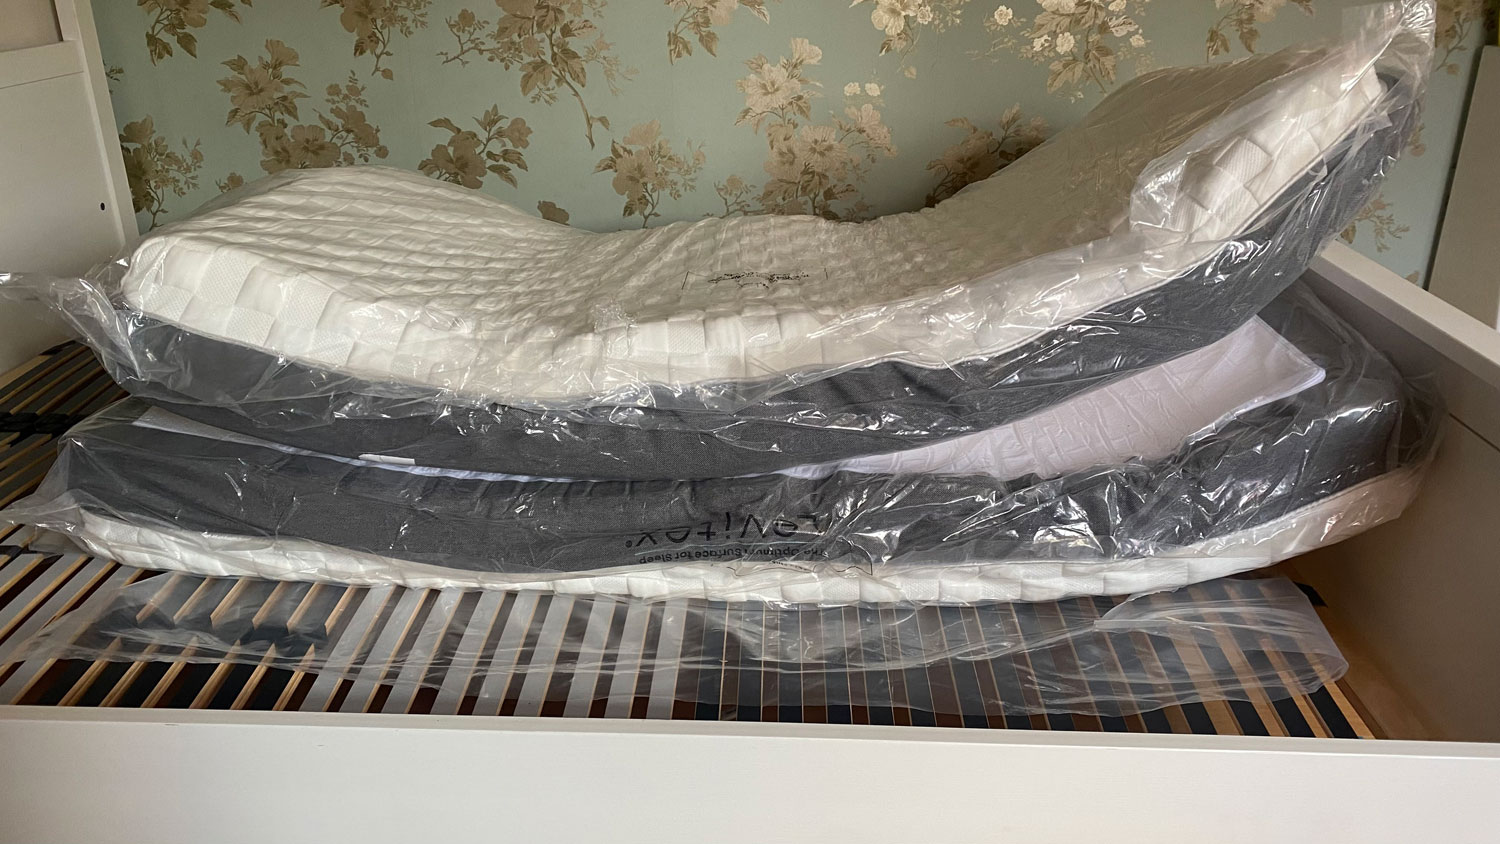 The Levitex Gravity Defying Mattress vaccum-packed in plastic wrapping